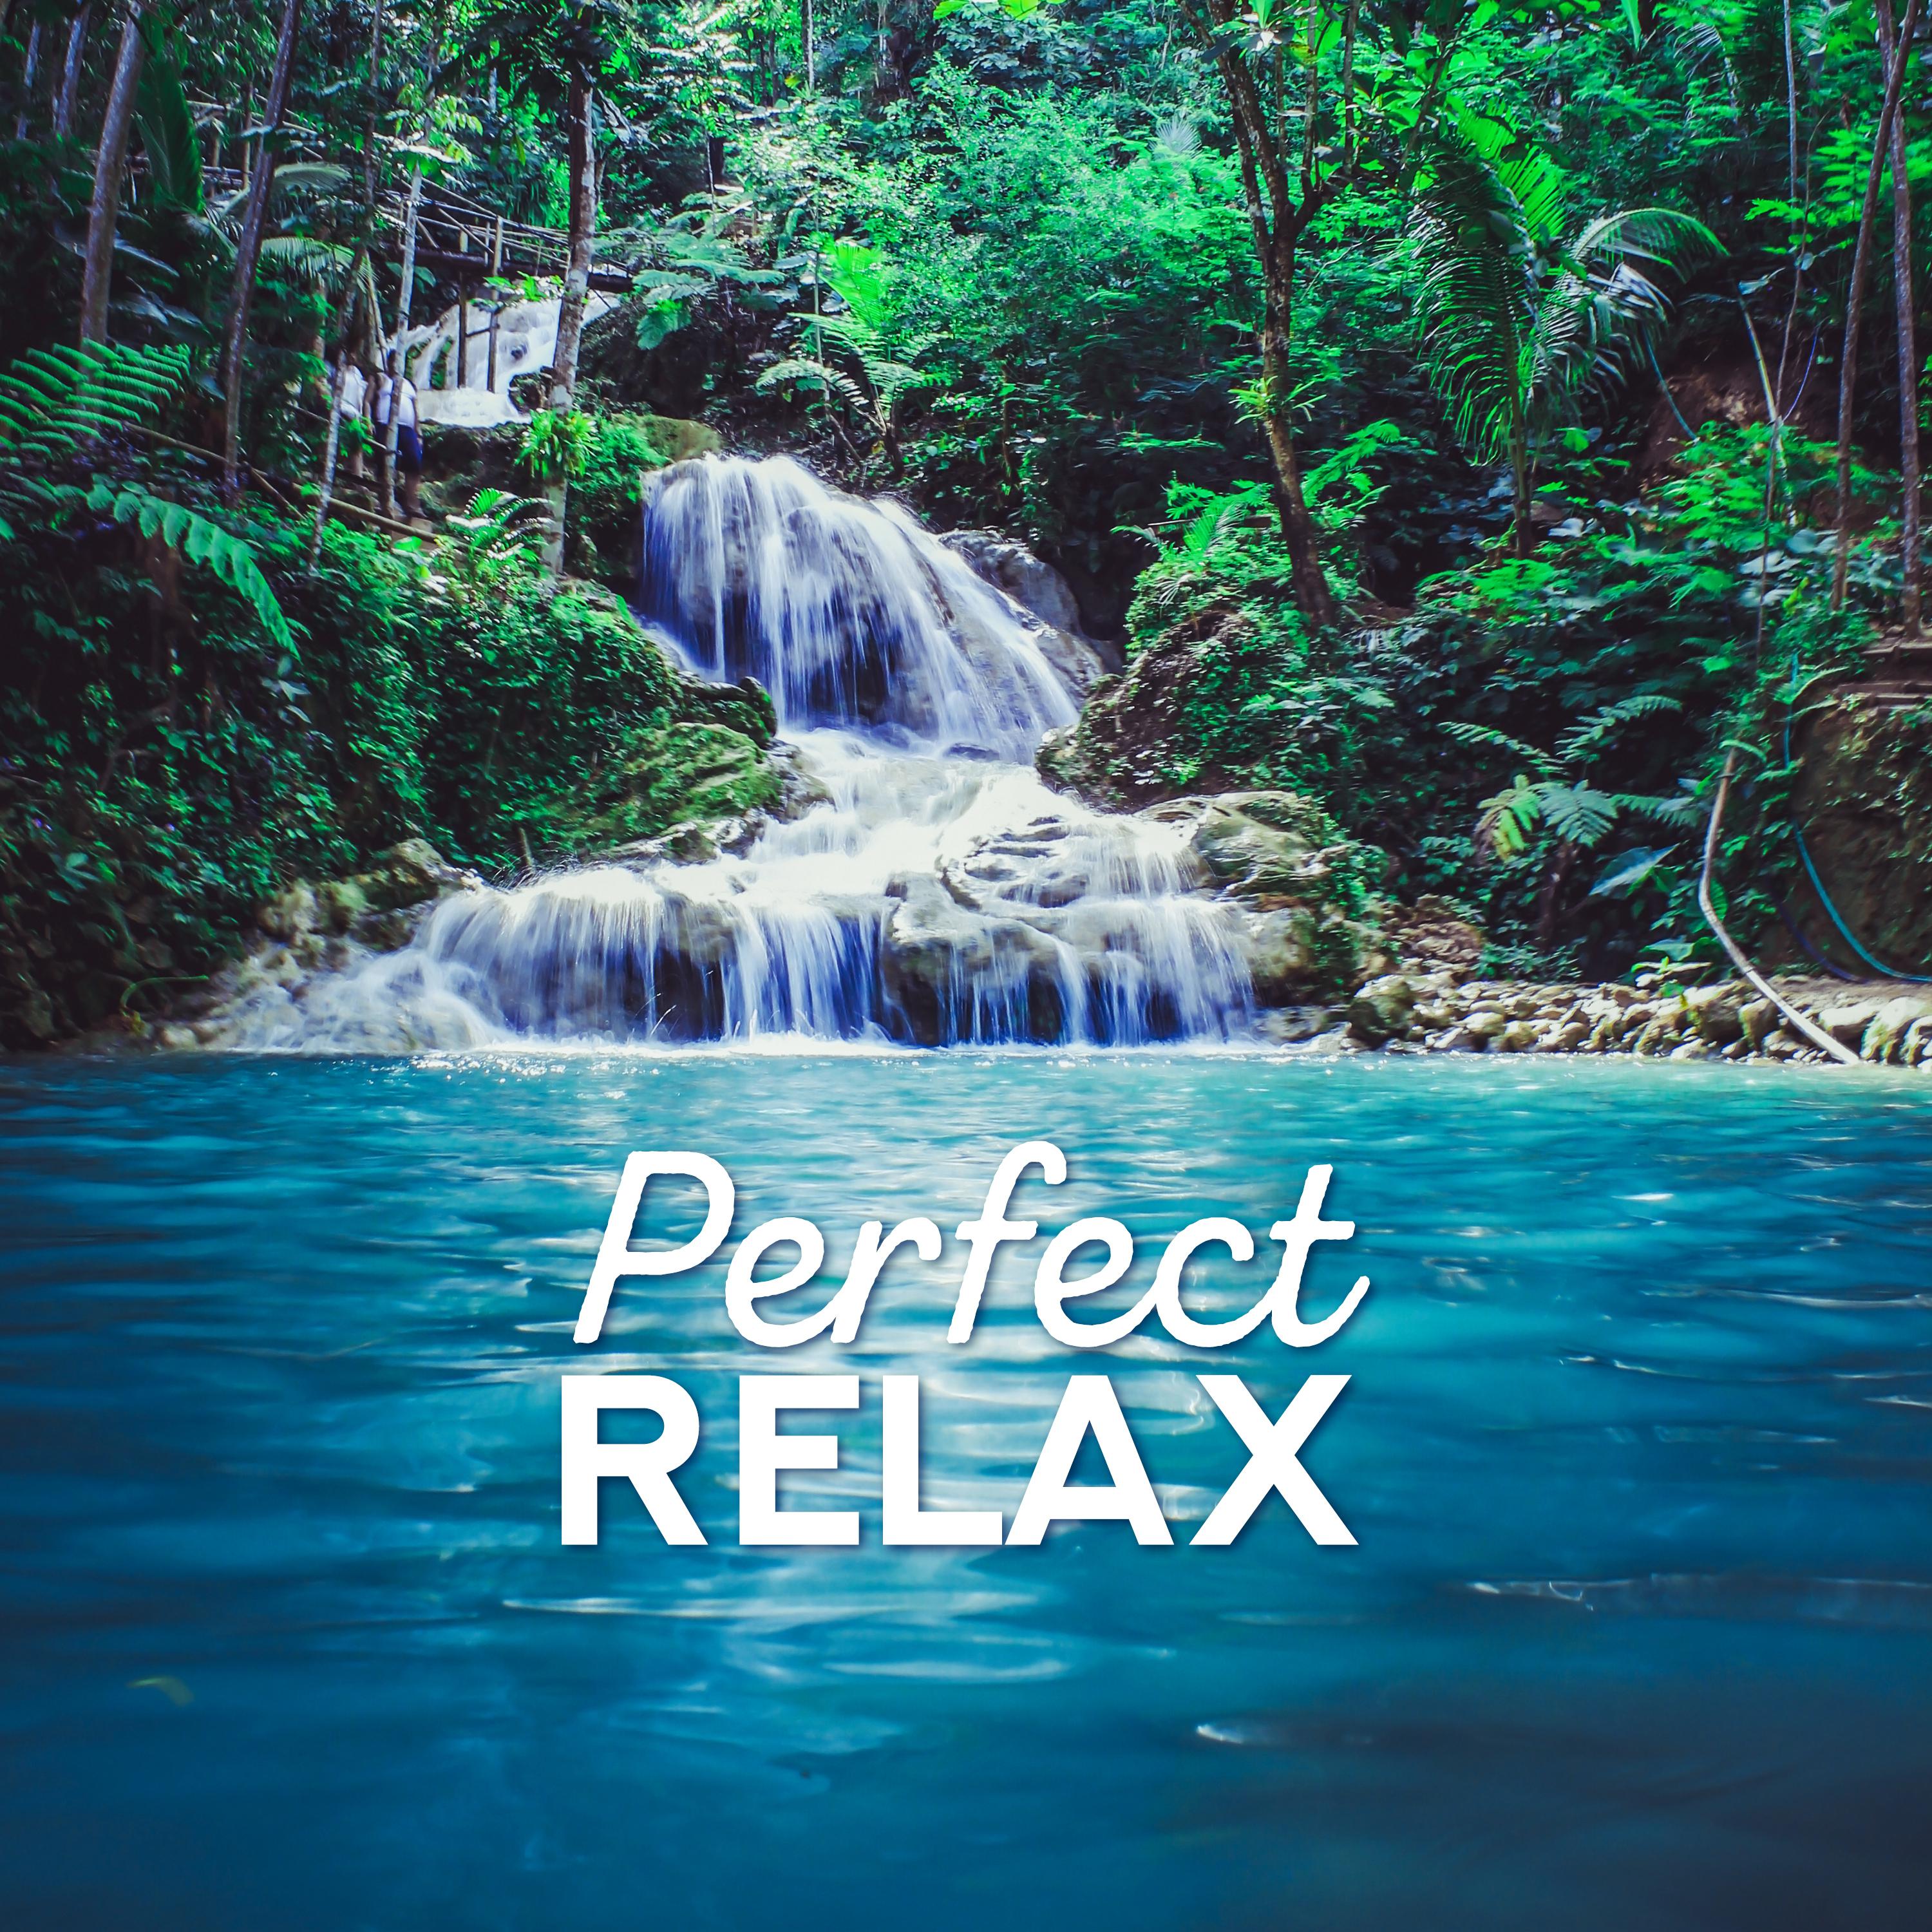 Perfect Relax